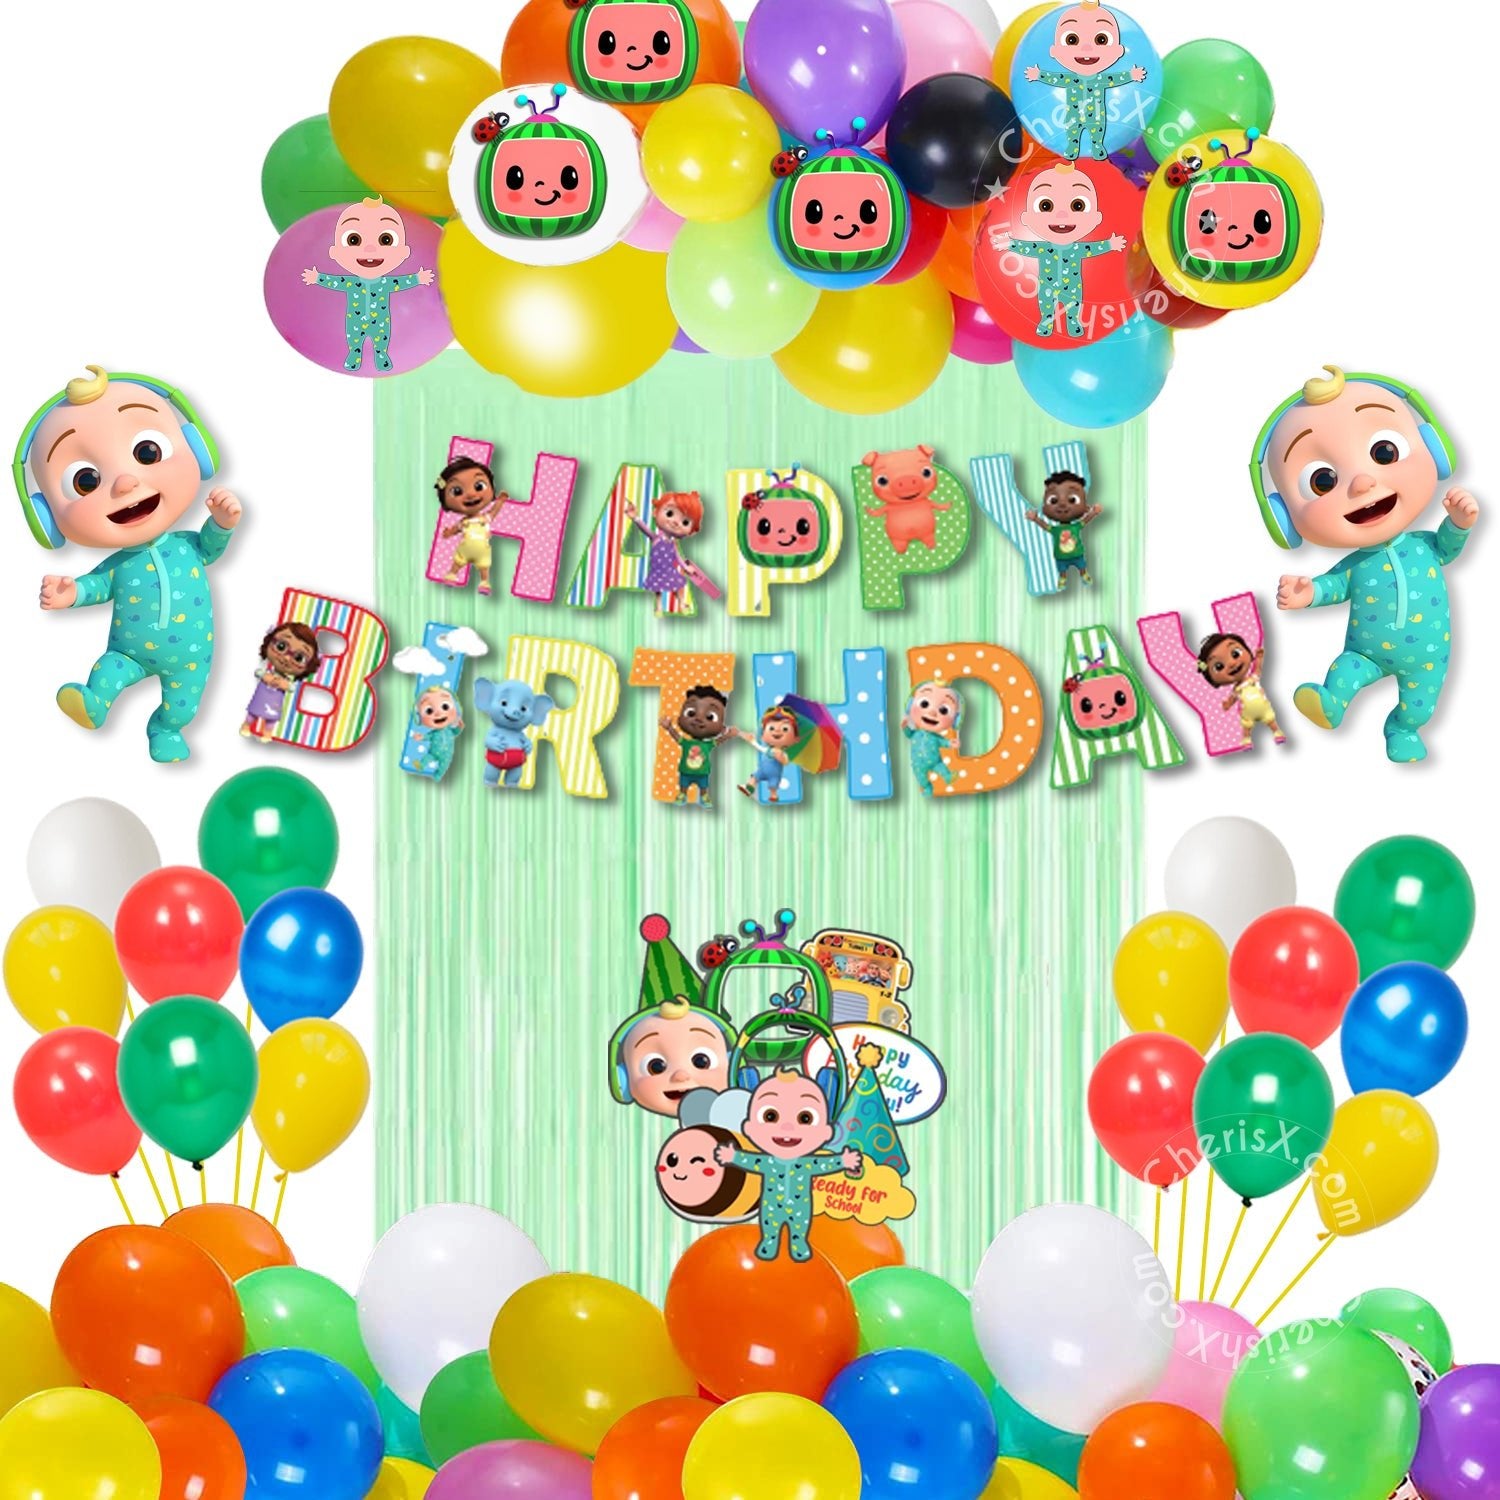 Cocomelon Theme Party Decoration Items for Kids Birthday - Pack of 67 Pcs - Bunting, multicolor balloons - Green Pastel & Photo props freeshipping - CherishX Partystore